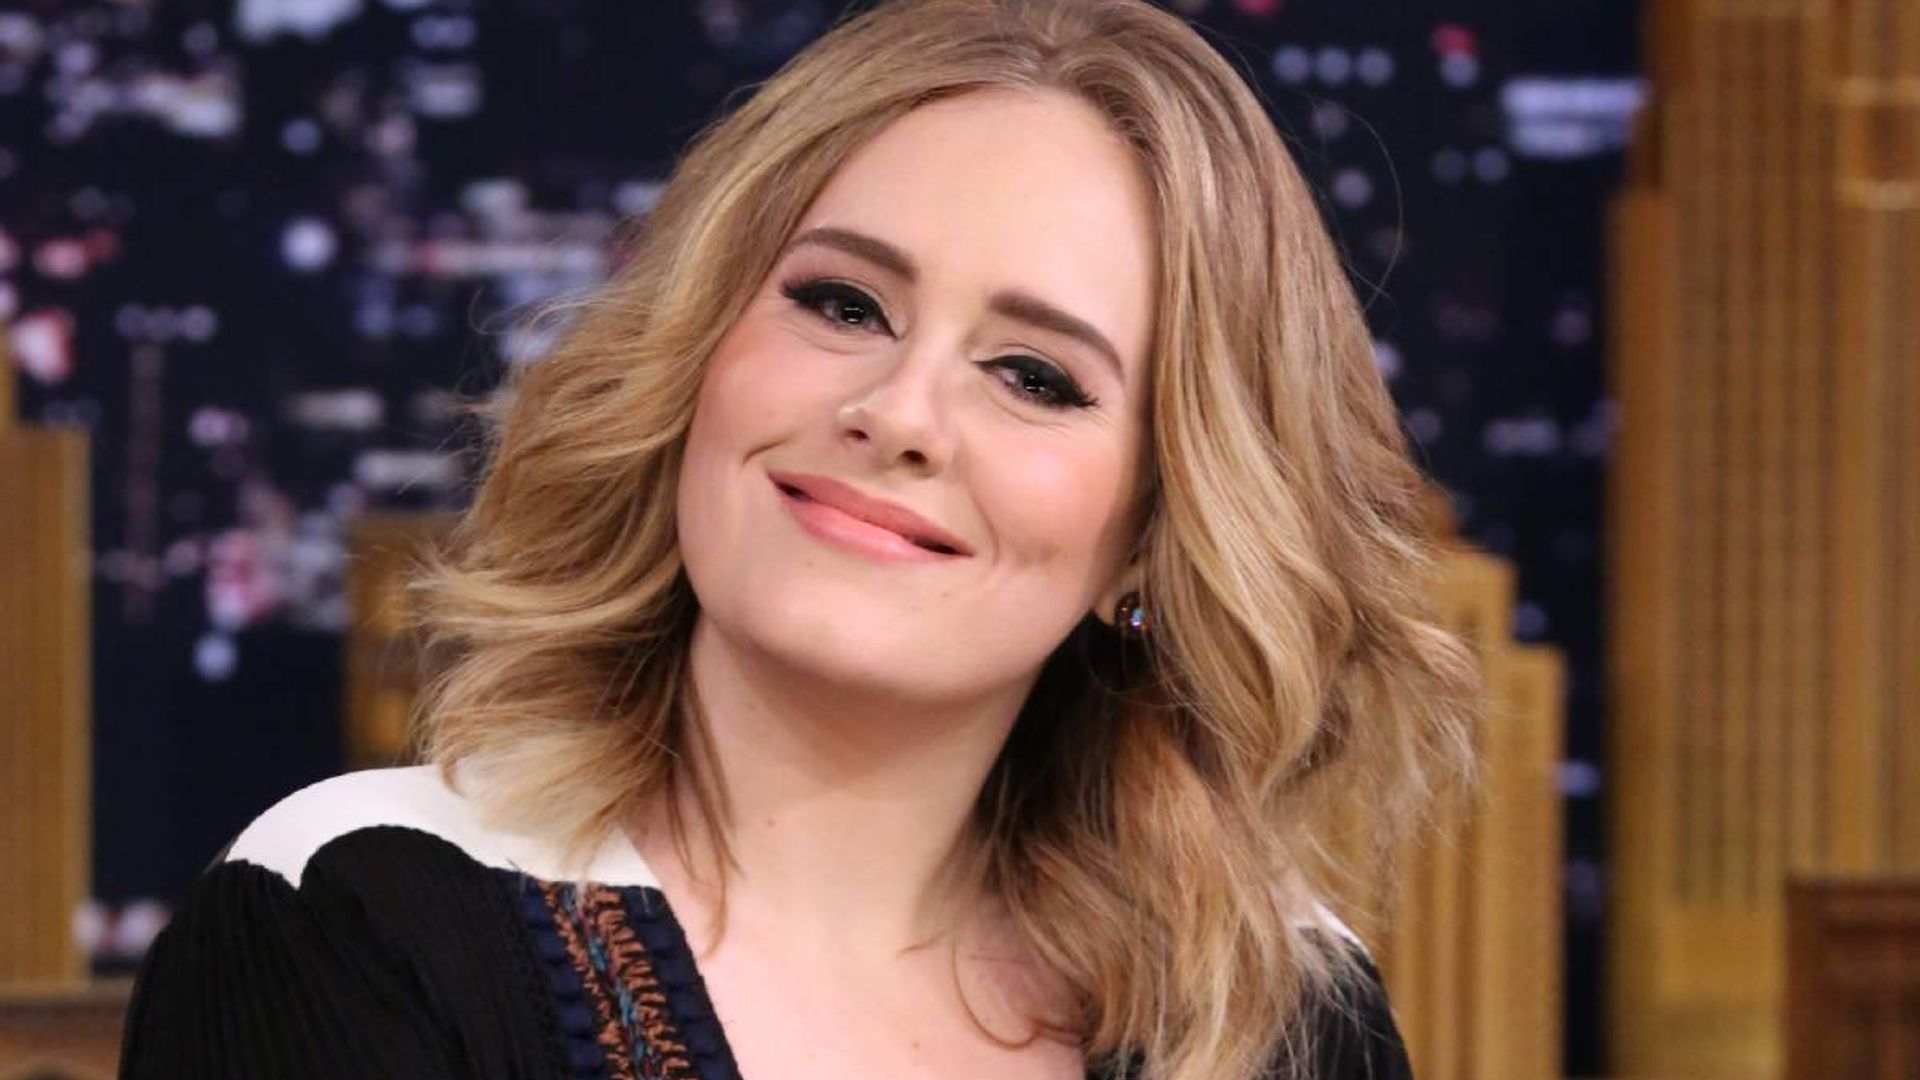 Adele's latest appearance causes a stir amid weight loss ...